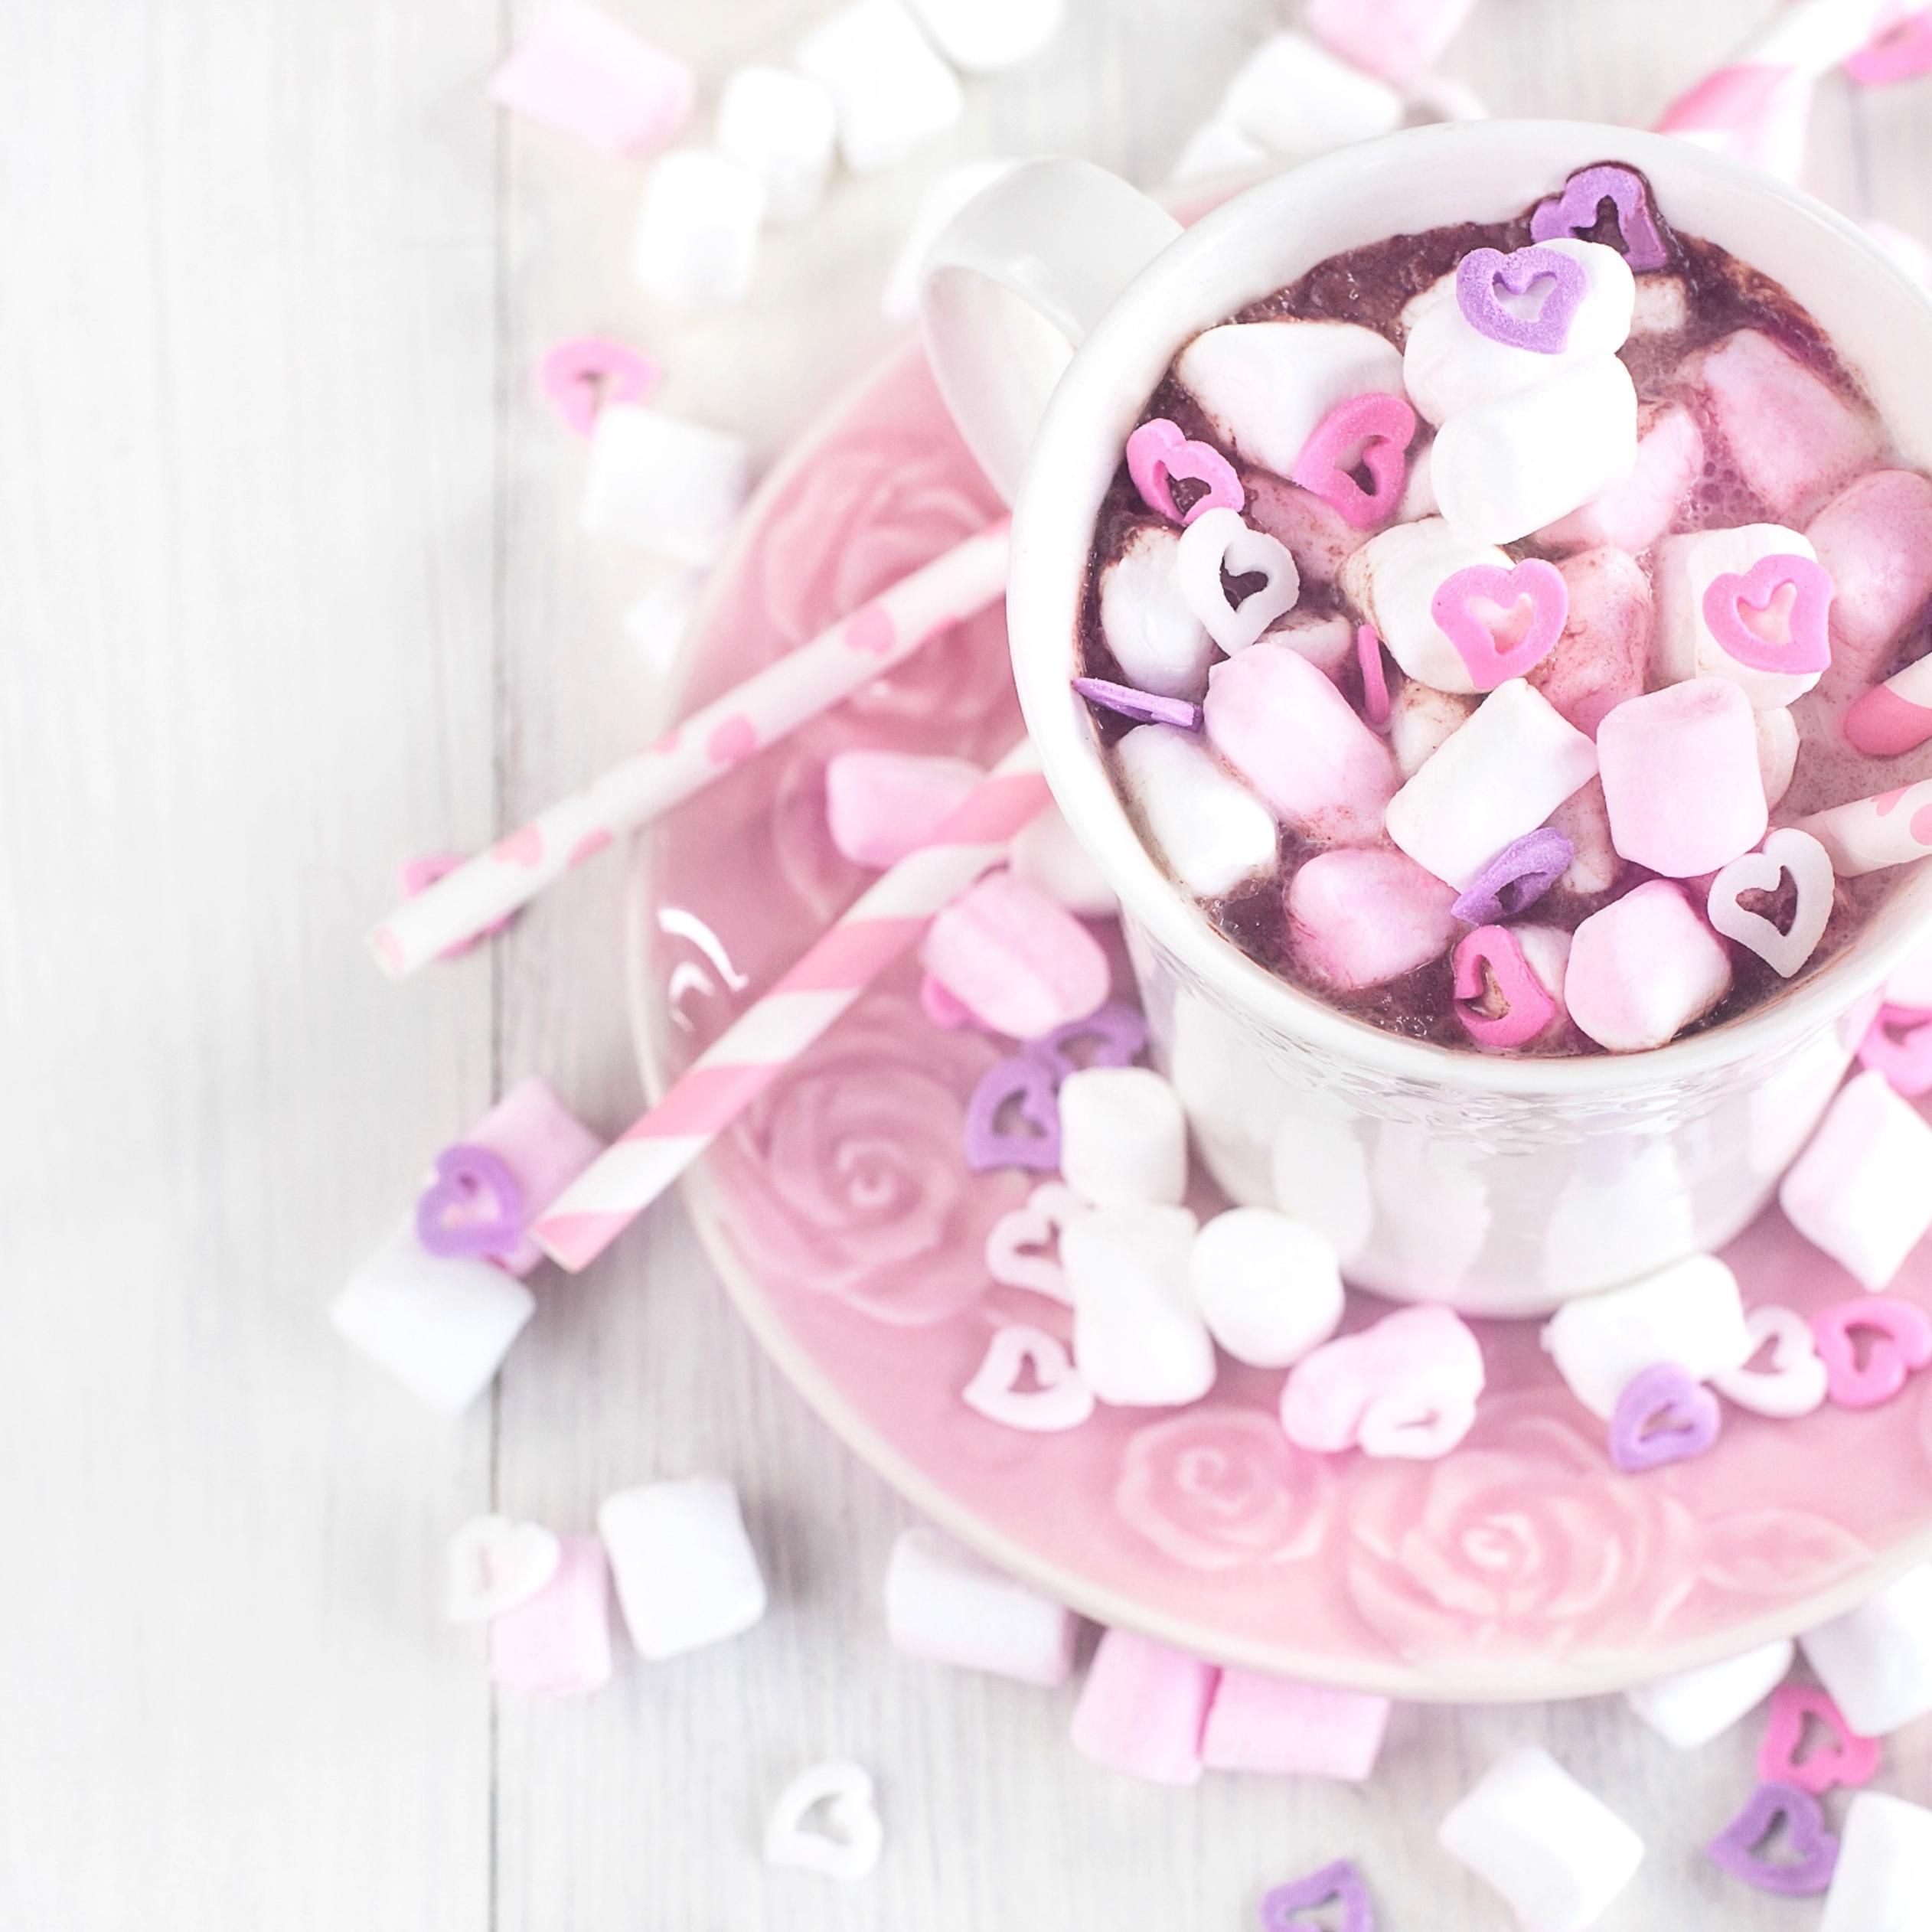 Sweet pink candies in a hot chocolate cup